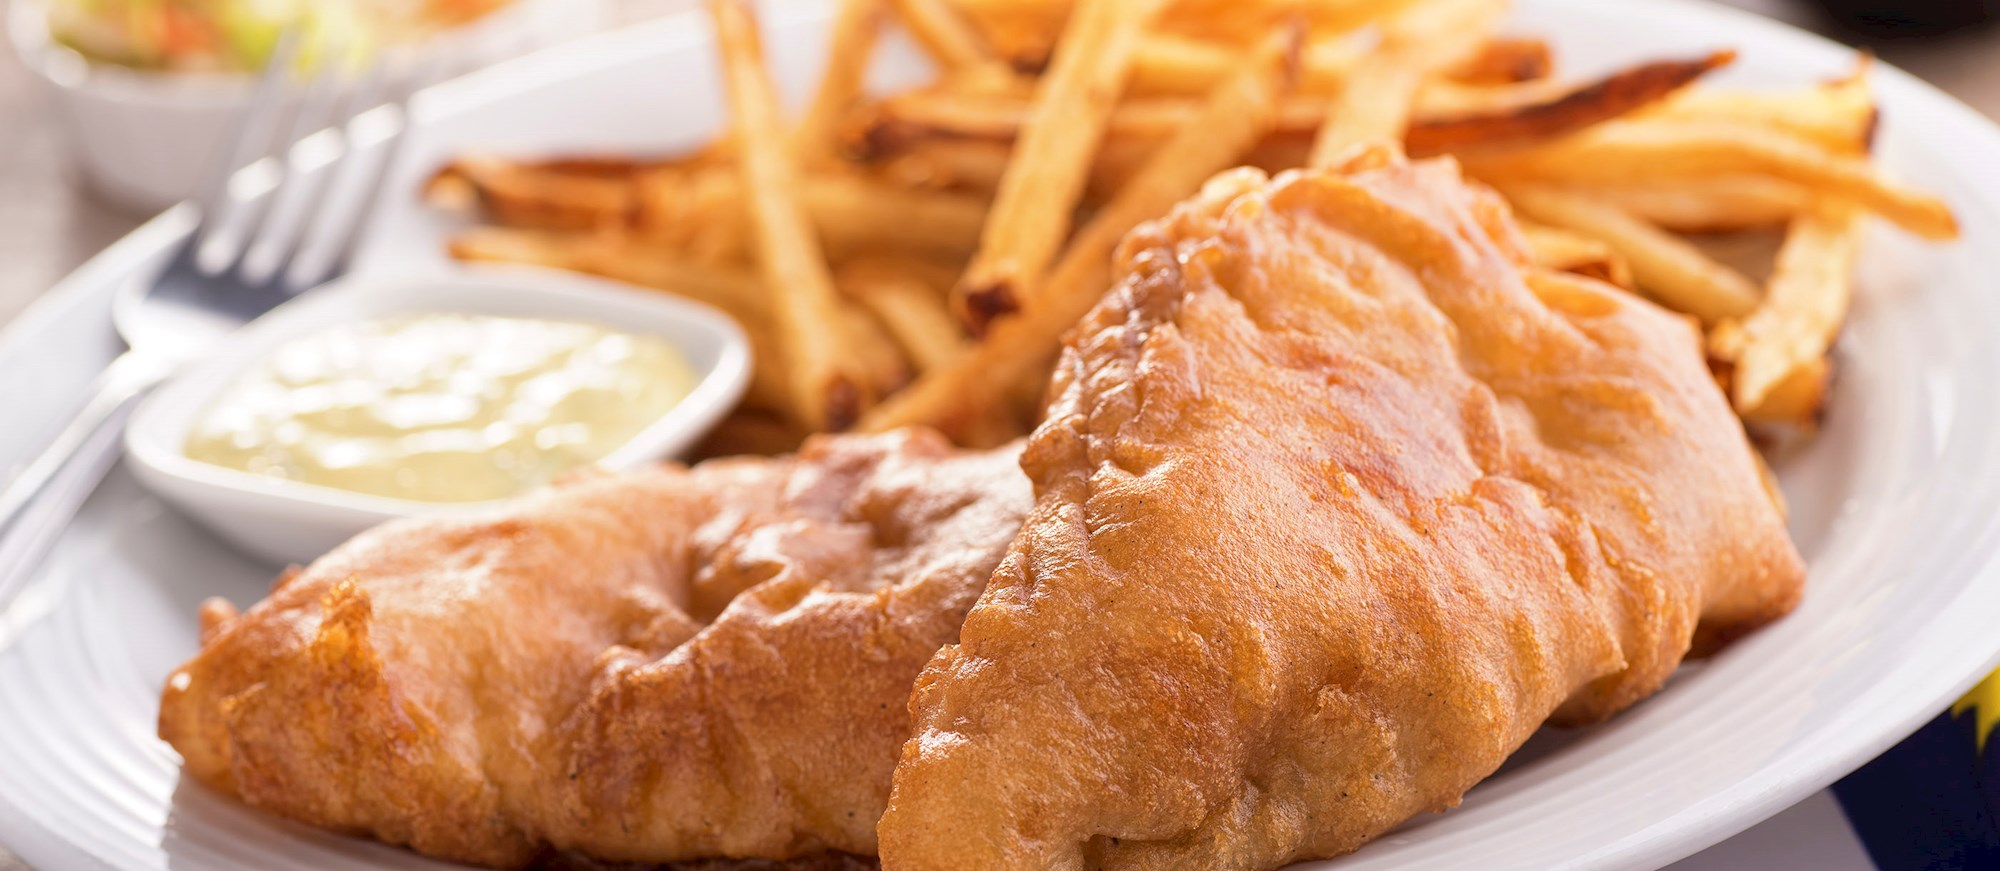 Where to Eat the Best Fish Fry in the World? | TasteAtlas